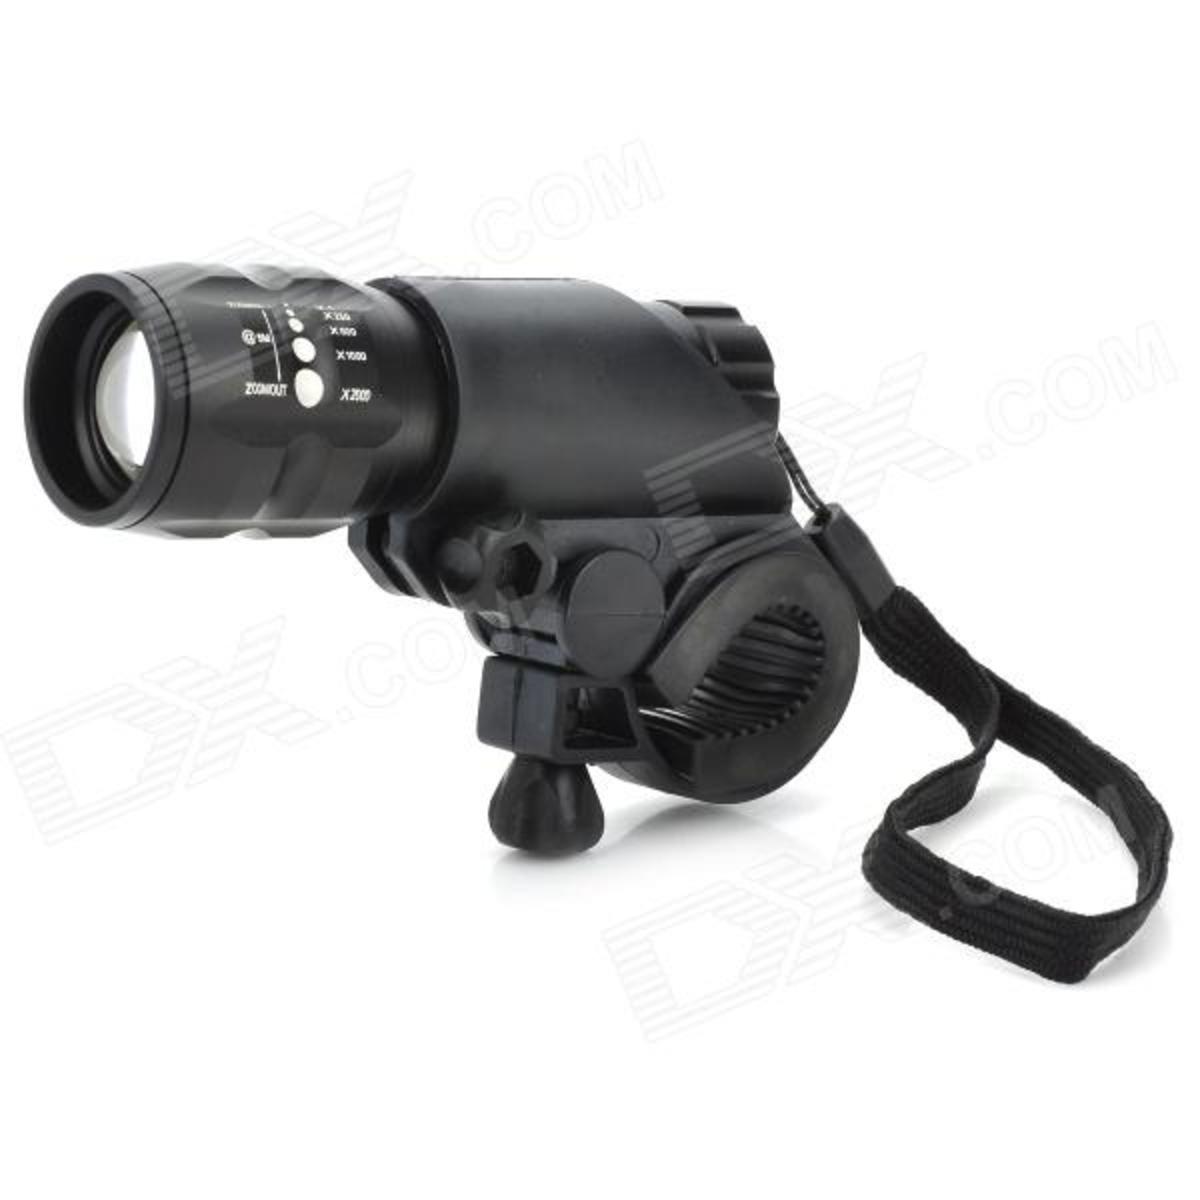 I have one of these really bright 150 lumen bicycle lights on order from Dealextreme. 